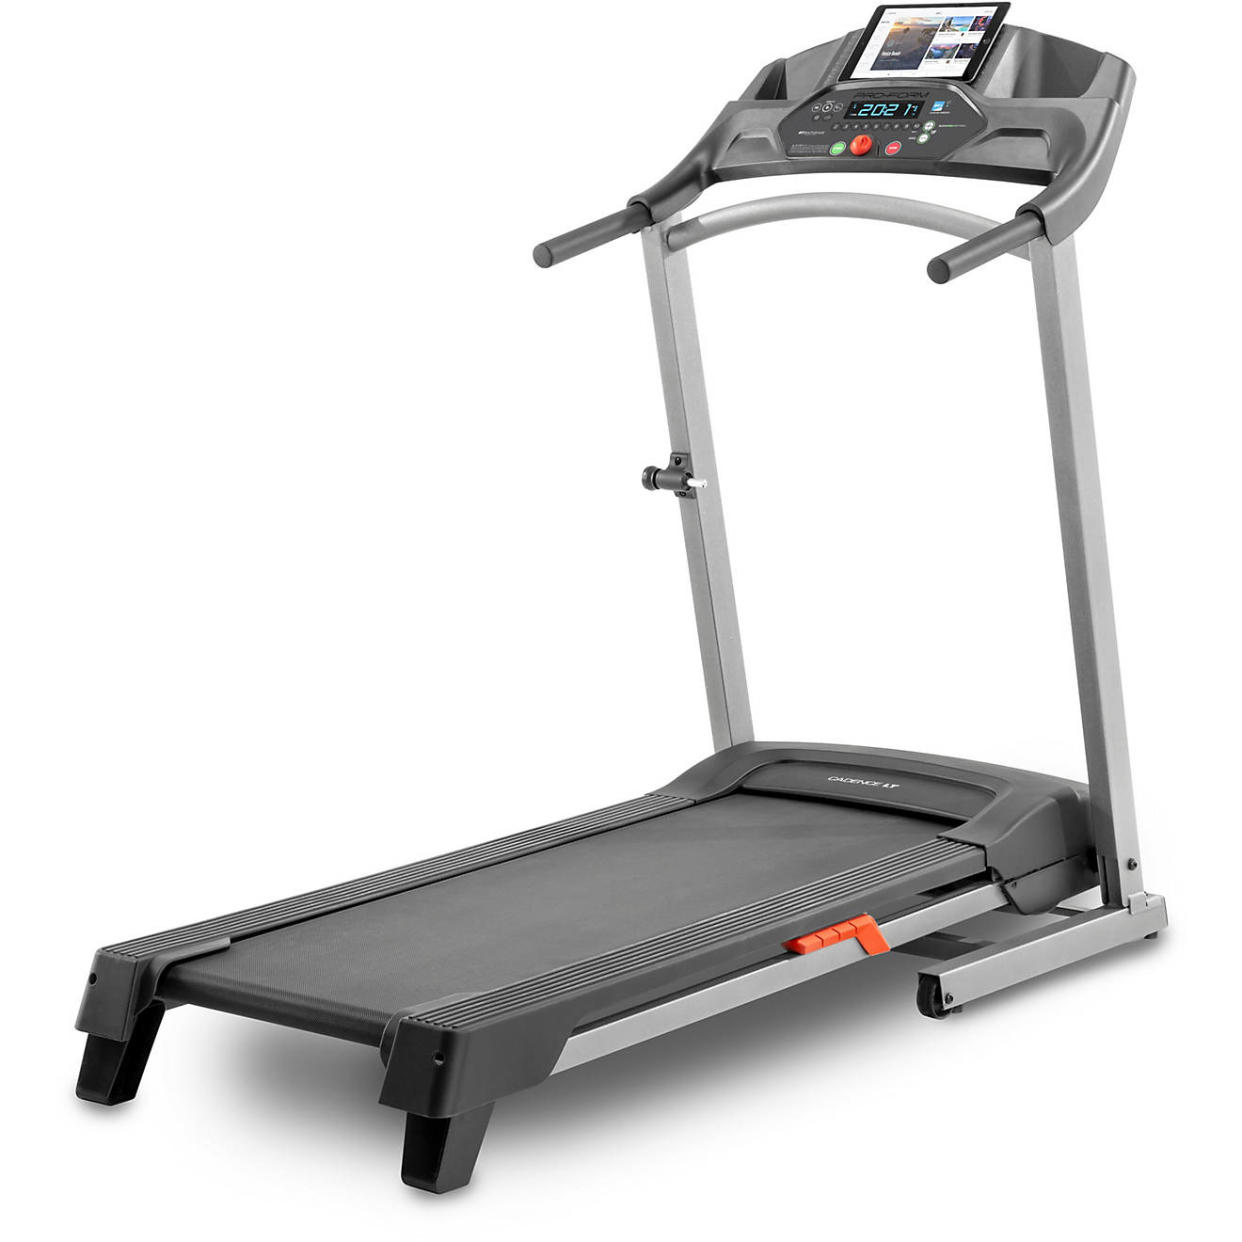 Black and silver treadmill with LED screen